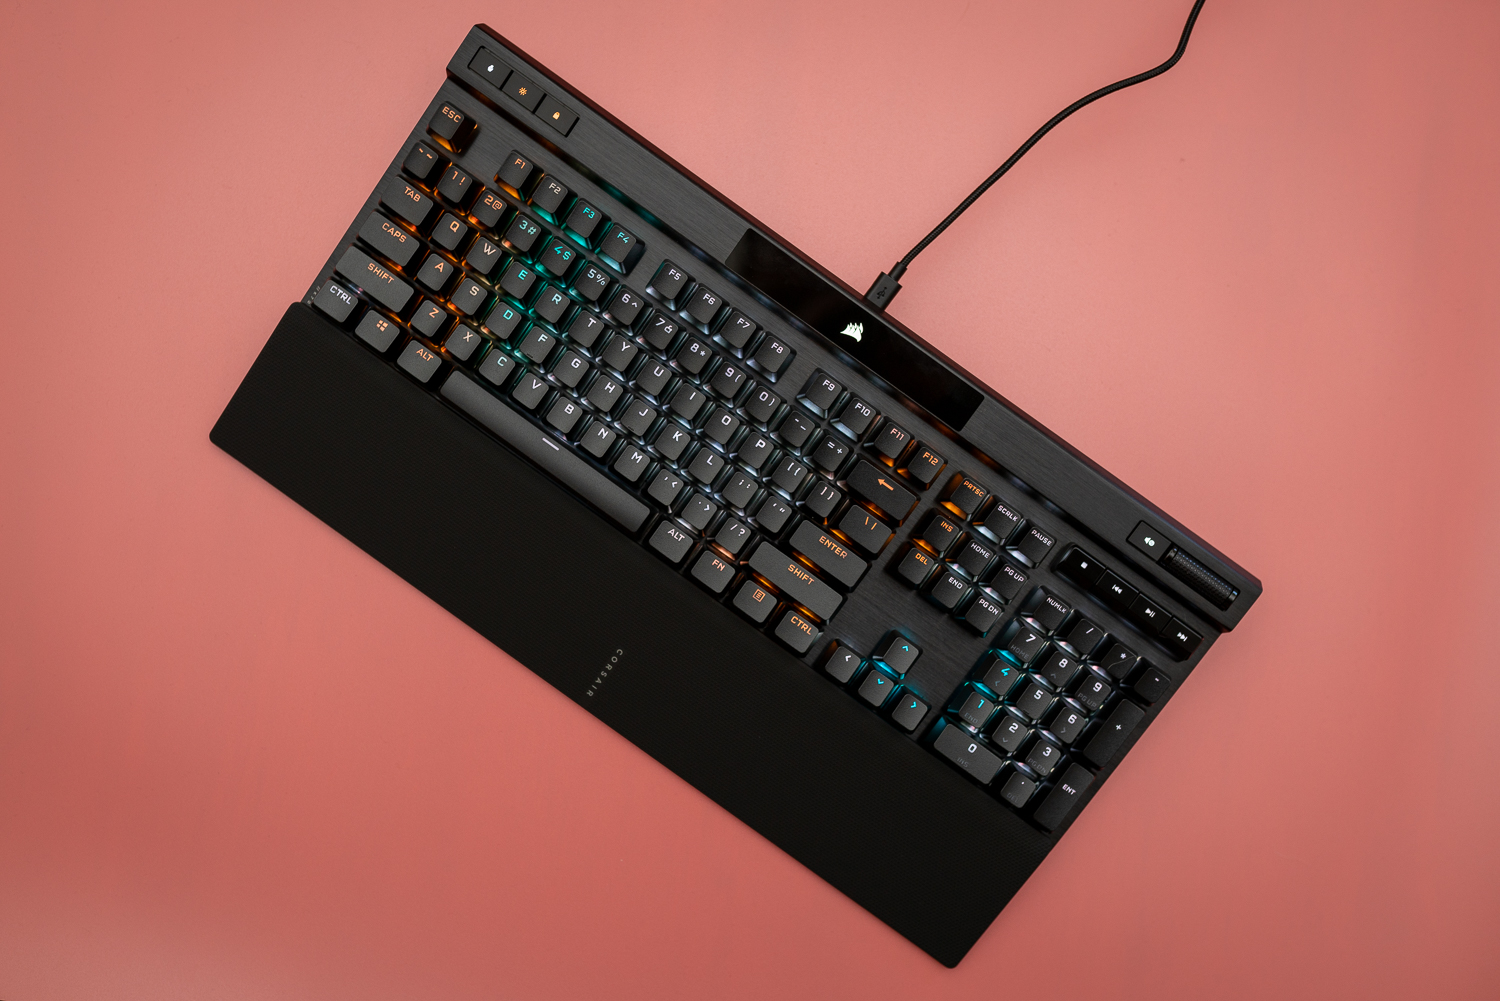 Corsair announces wireless keyboard, mouse and mouse mat - Peripherals -  News 